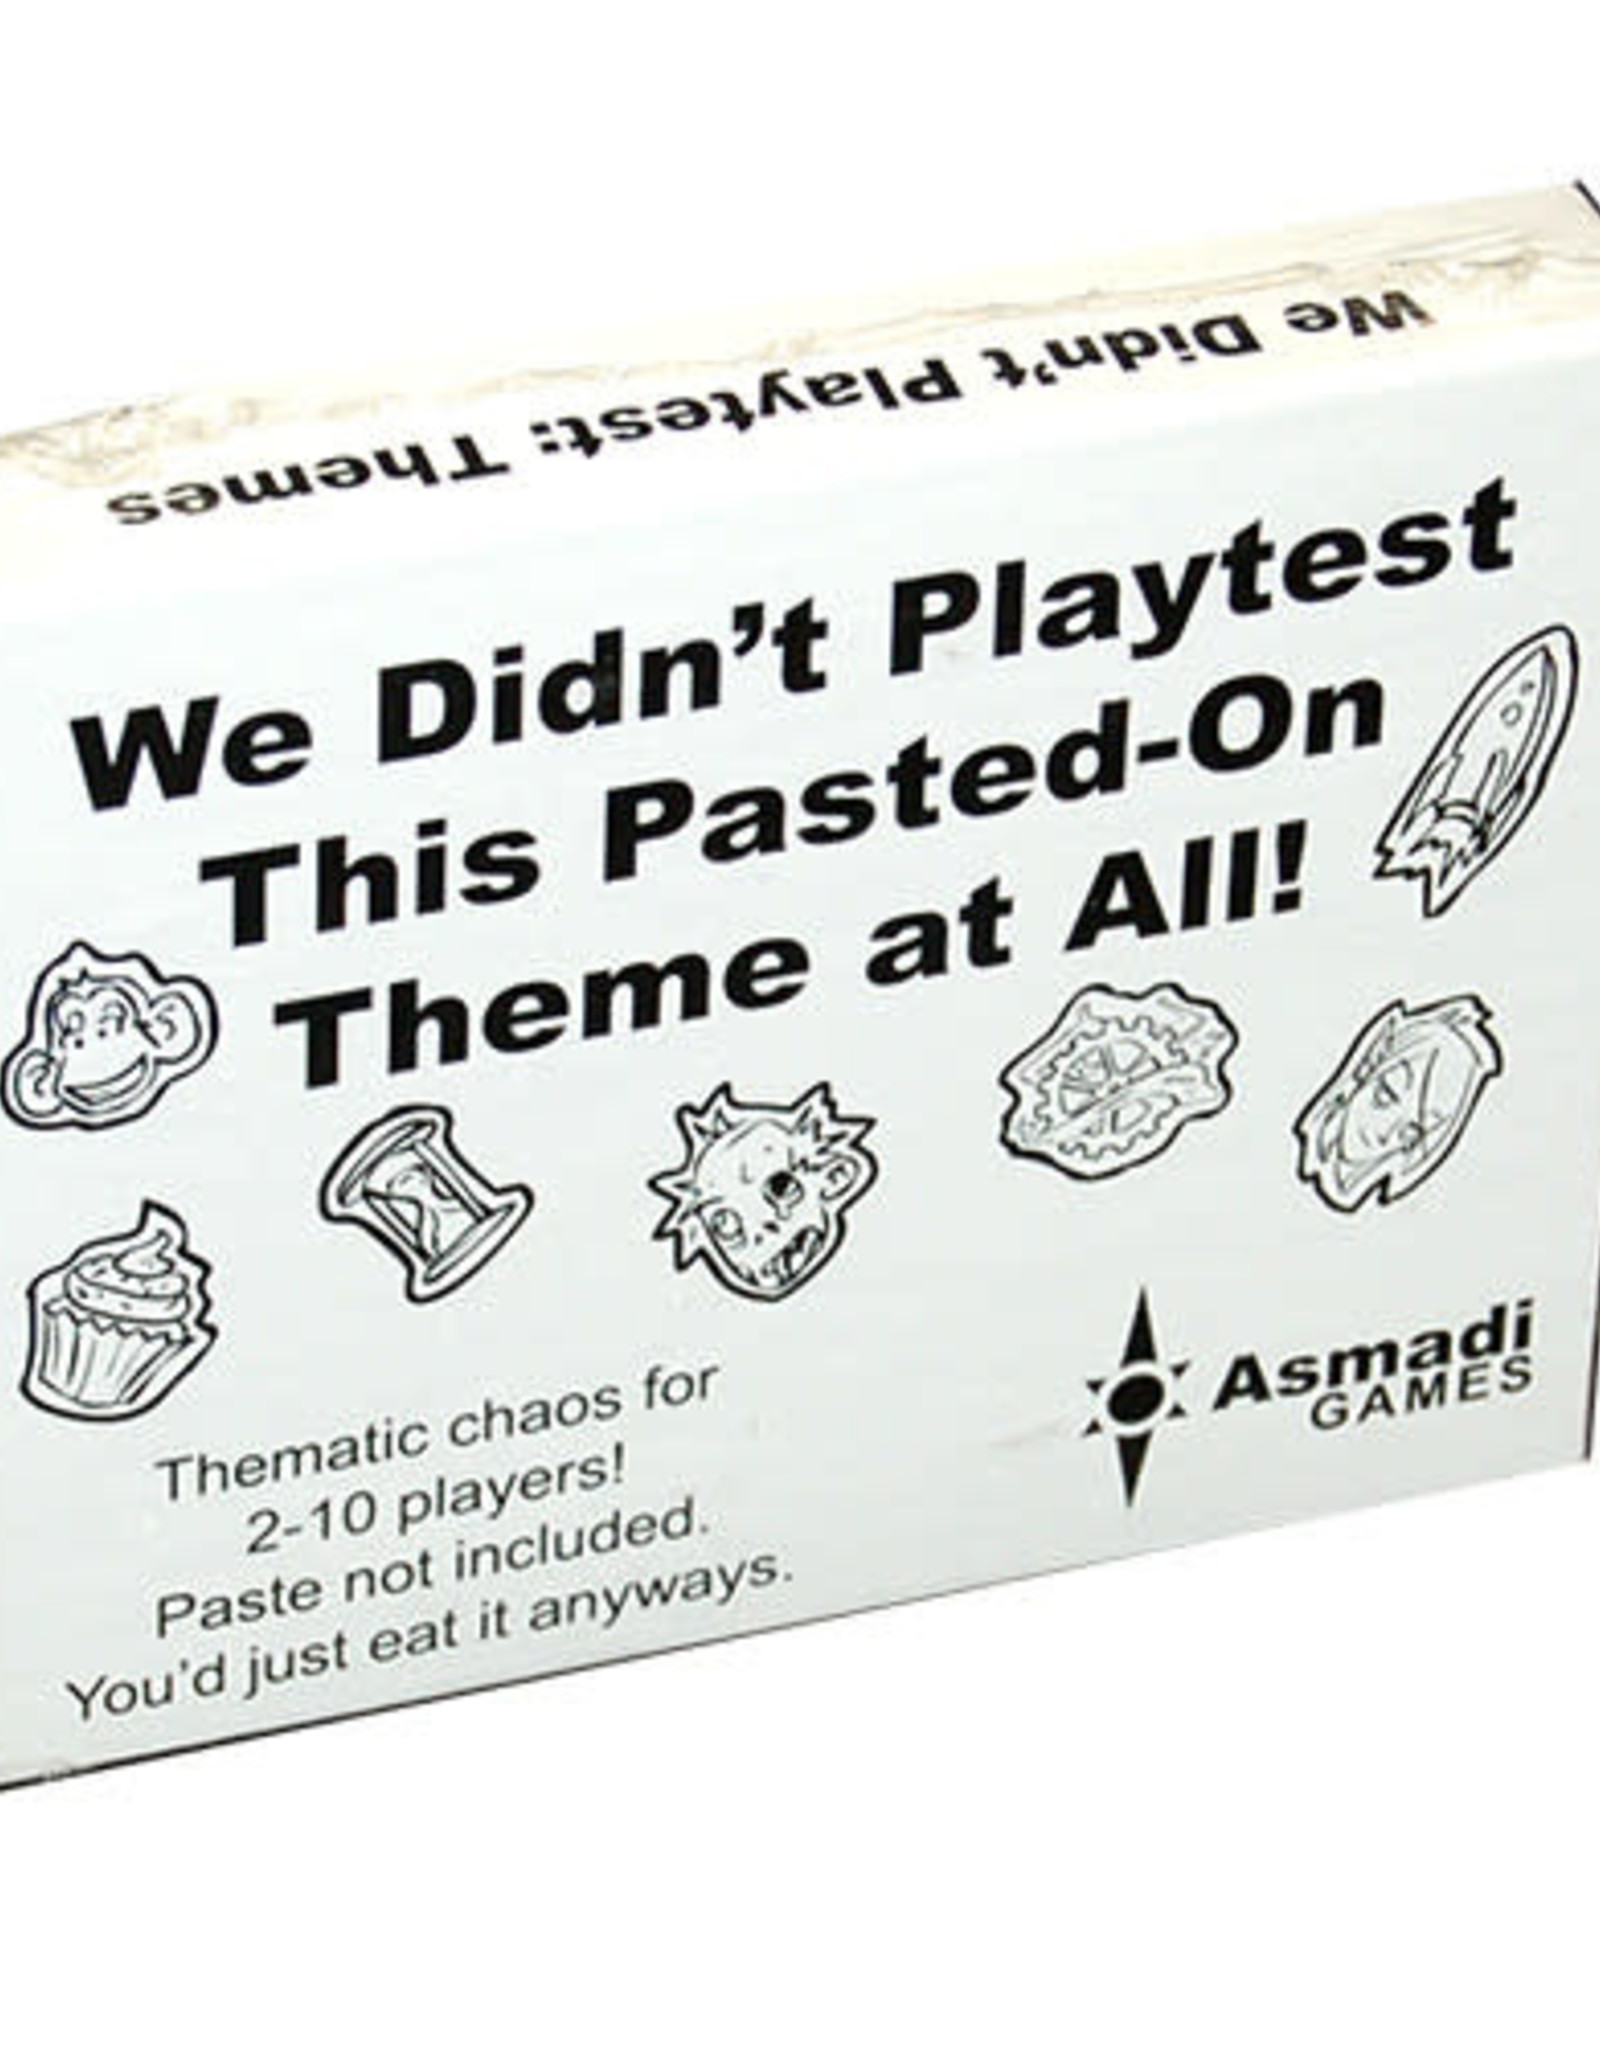 Asmadi Games We Didn't Playtest This Pasted-On Theme at All